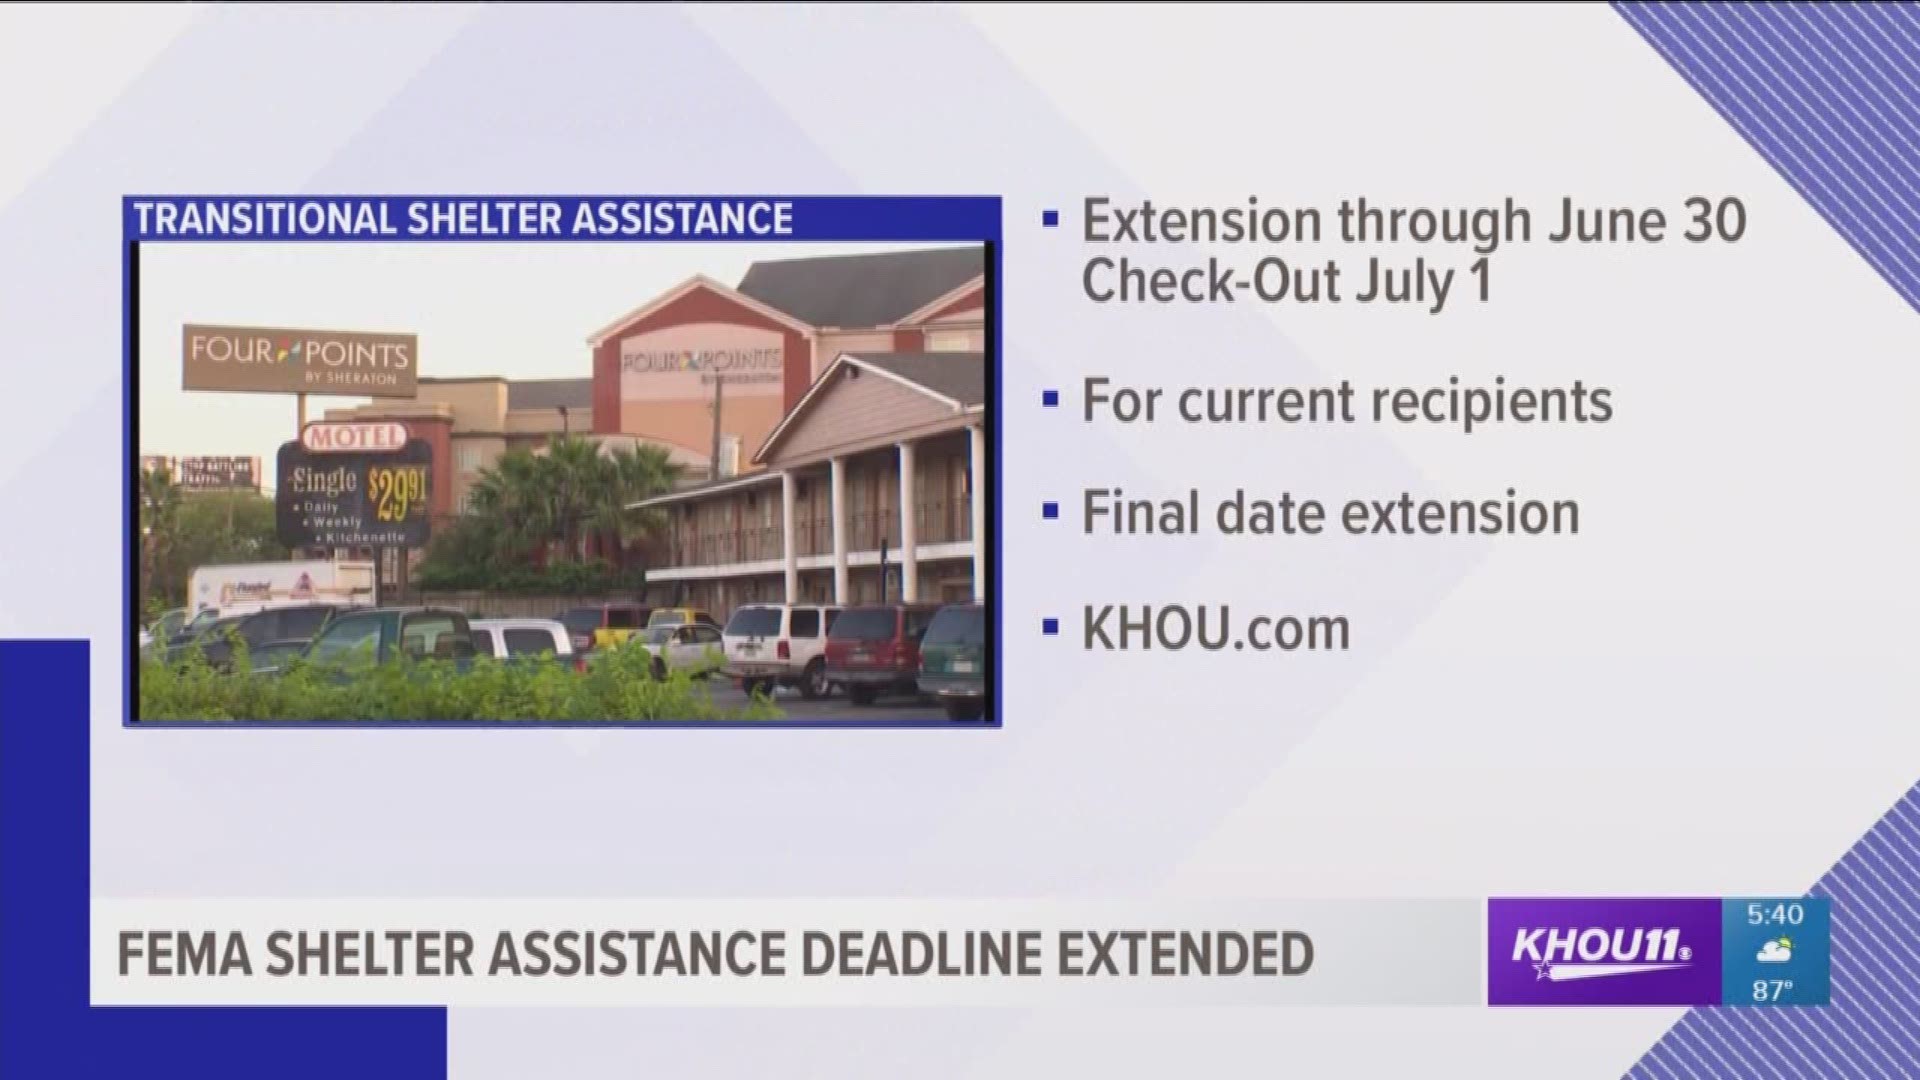 Hurricane Harvey survivors receiving Transitional Shelter Assistance can receive an extension to stay in hotels until June 30, FEMA announced Sunday.